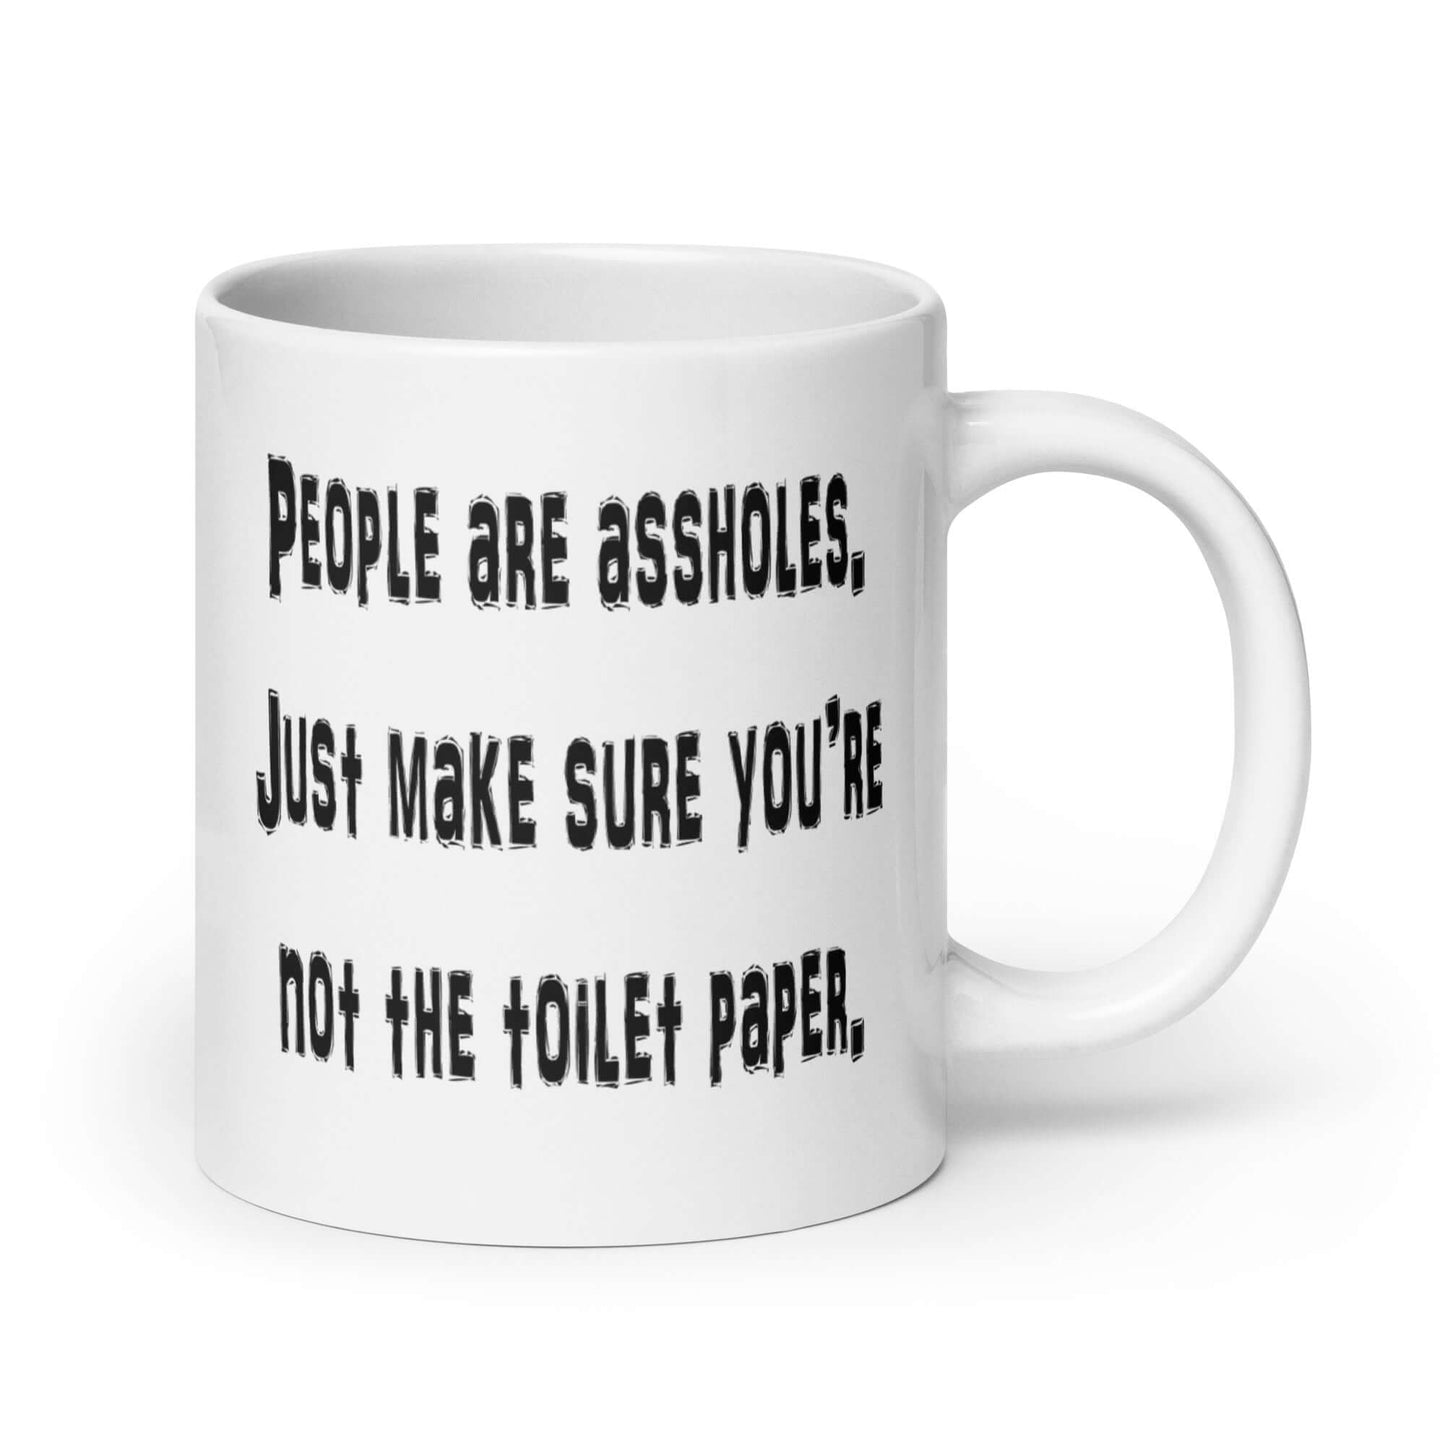 People are assholes don't be the toilet paper mug